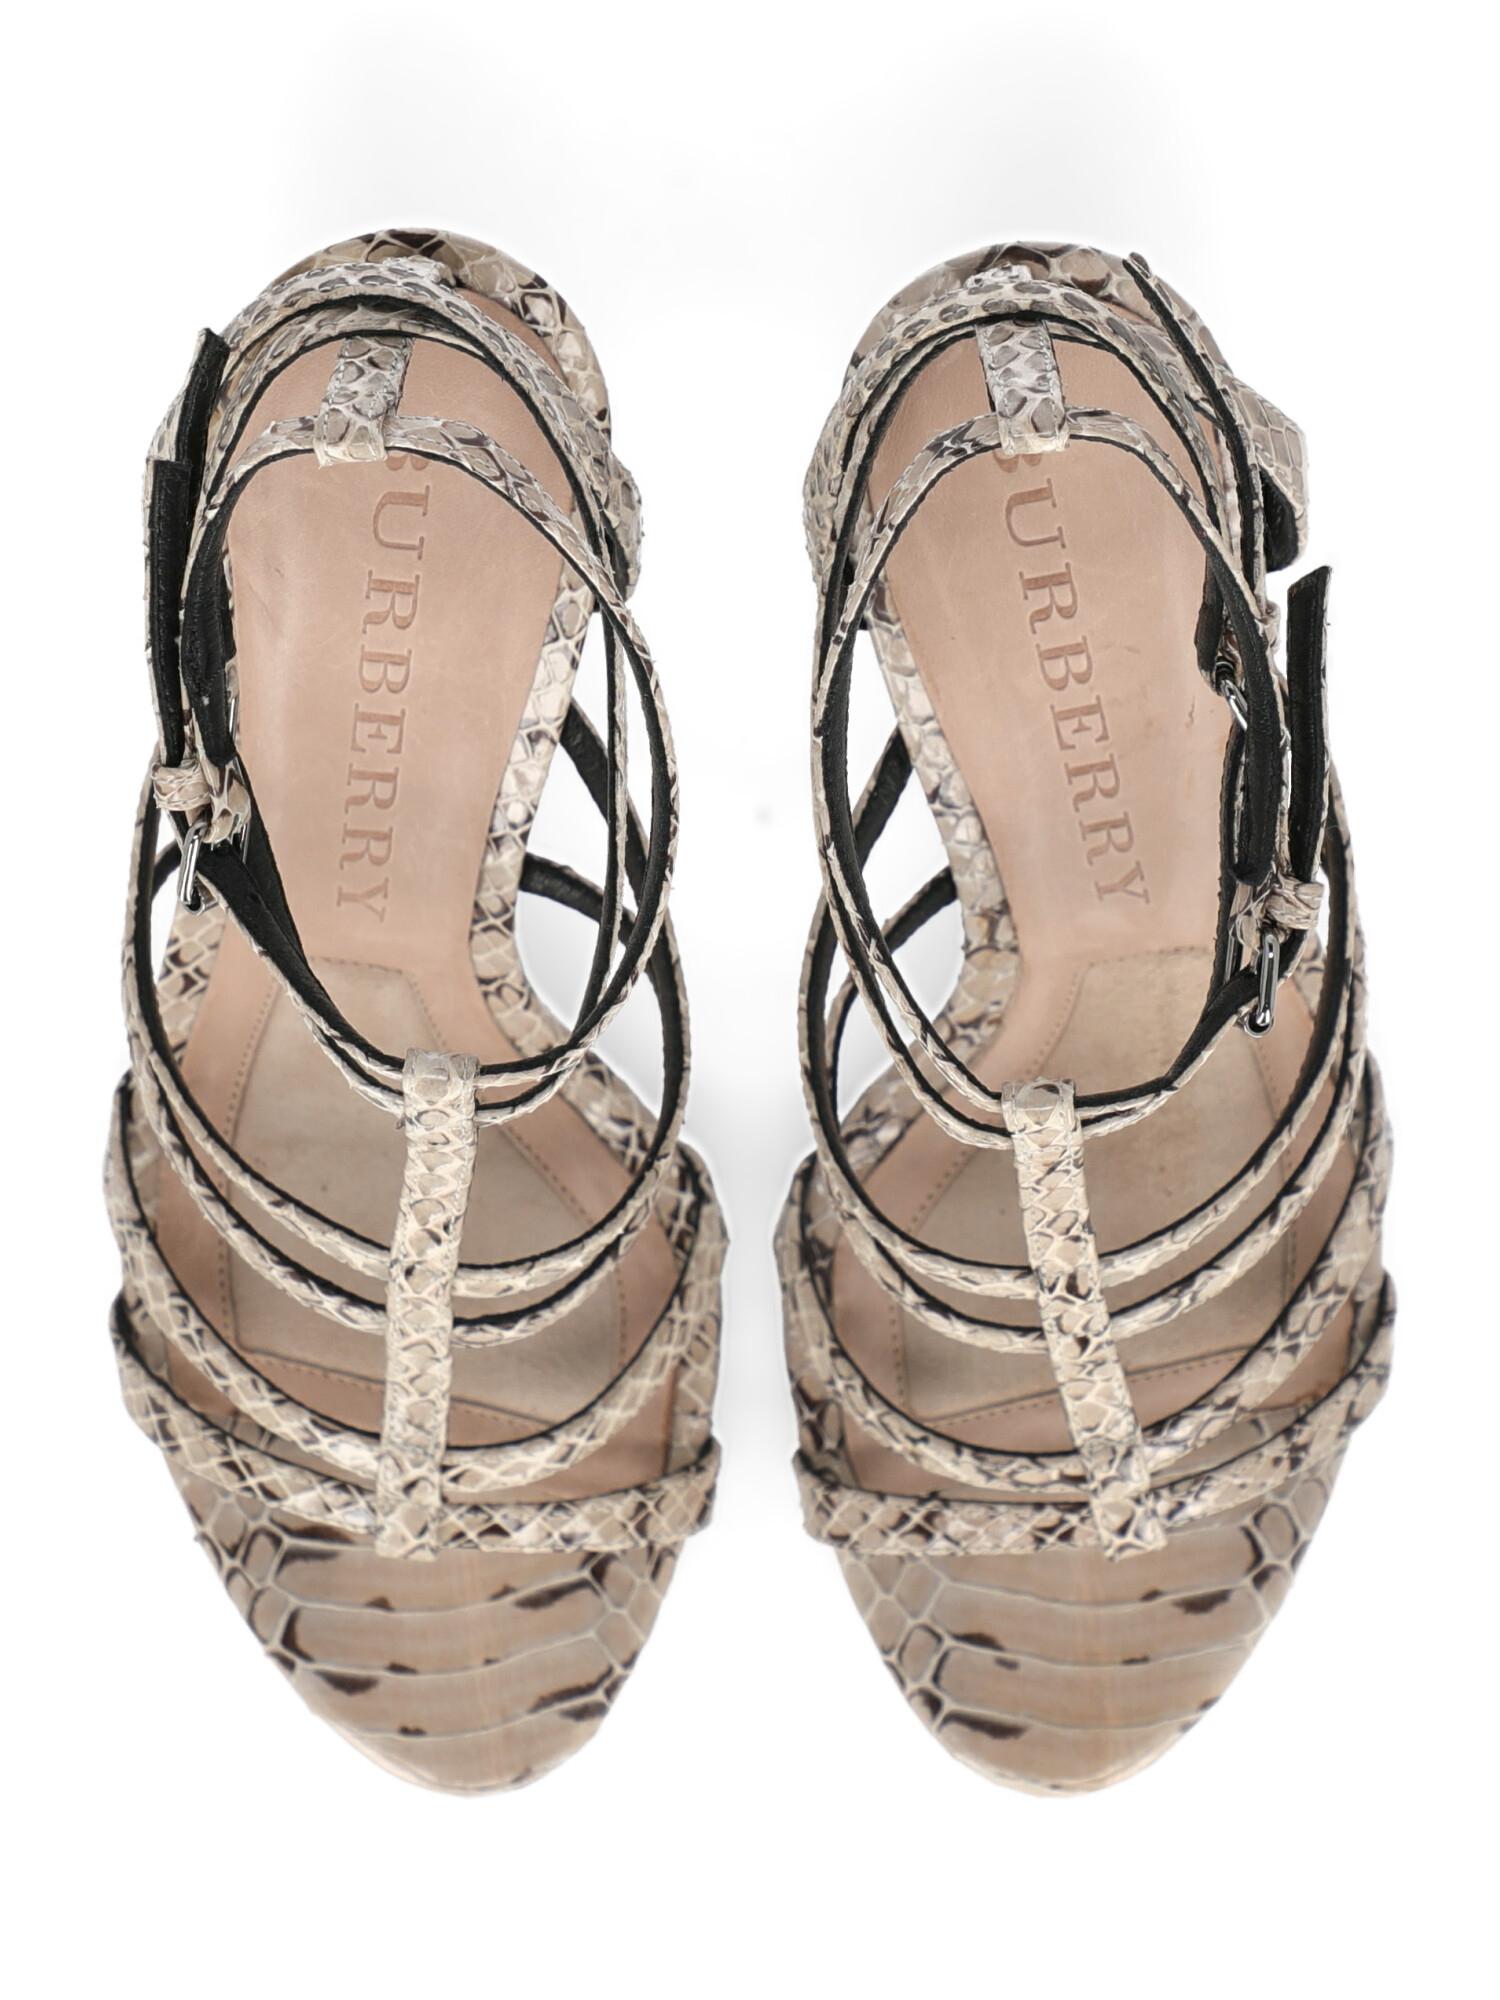 Burberry Woman Sandals Beige Leather IT 37 For Sale 2